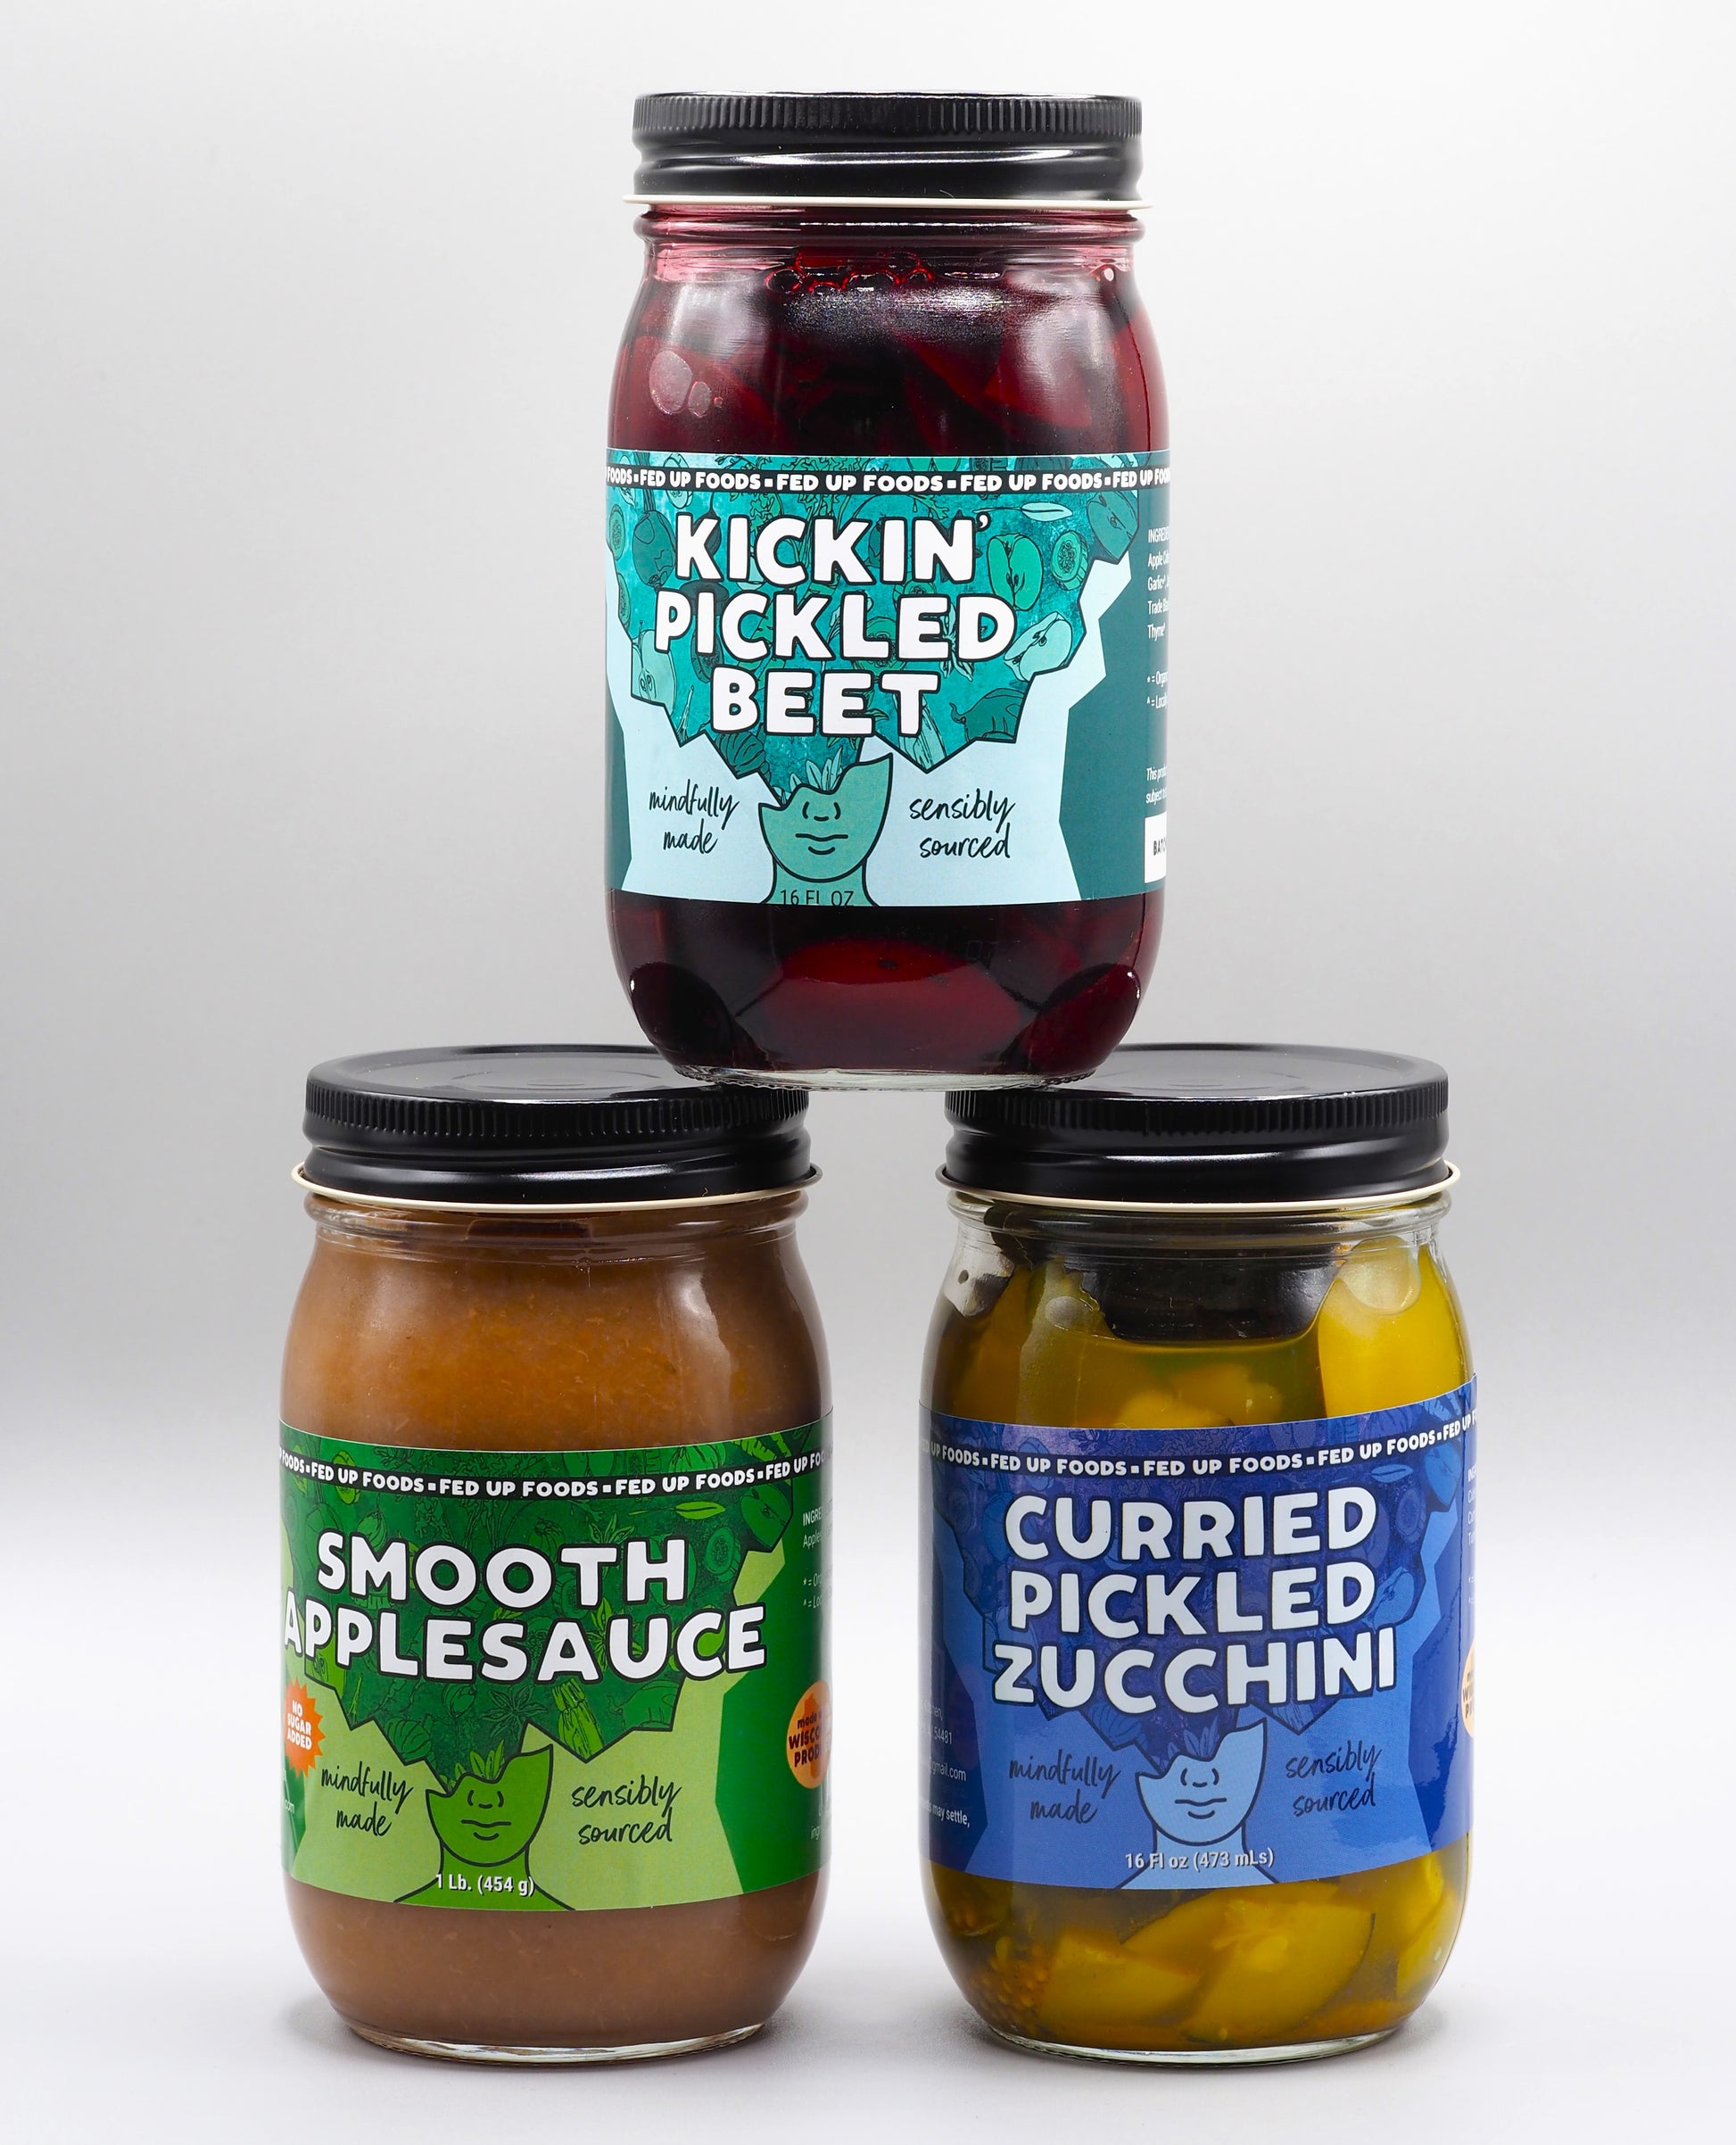 Fed Up Foods Kickin Pickled Beet, Curried Pickled Zucchini and smooth applesauce in a 3 pack variety pack